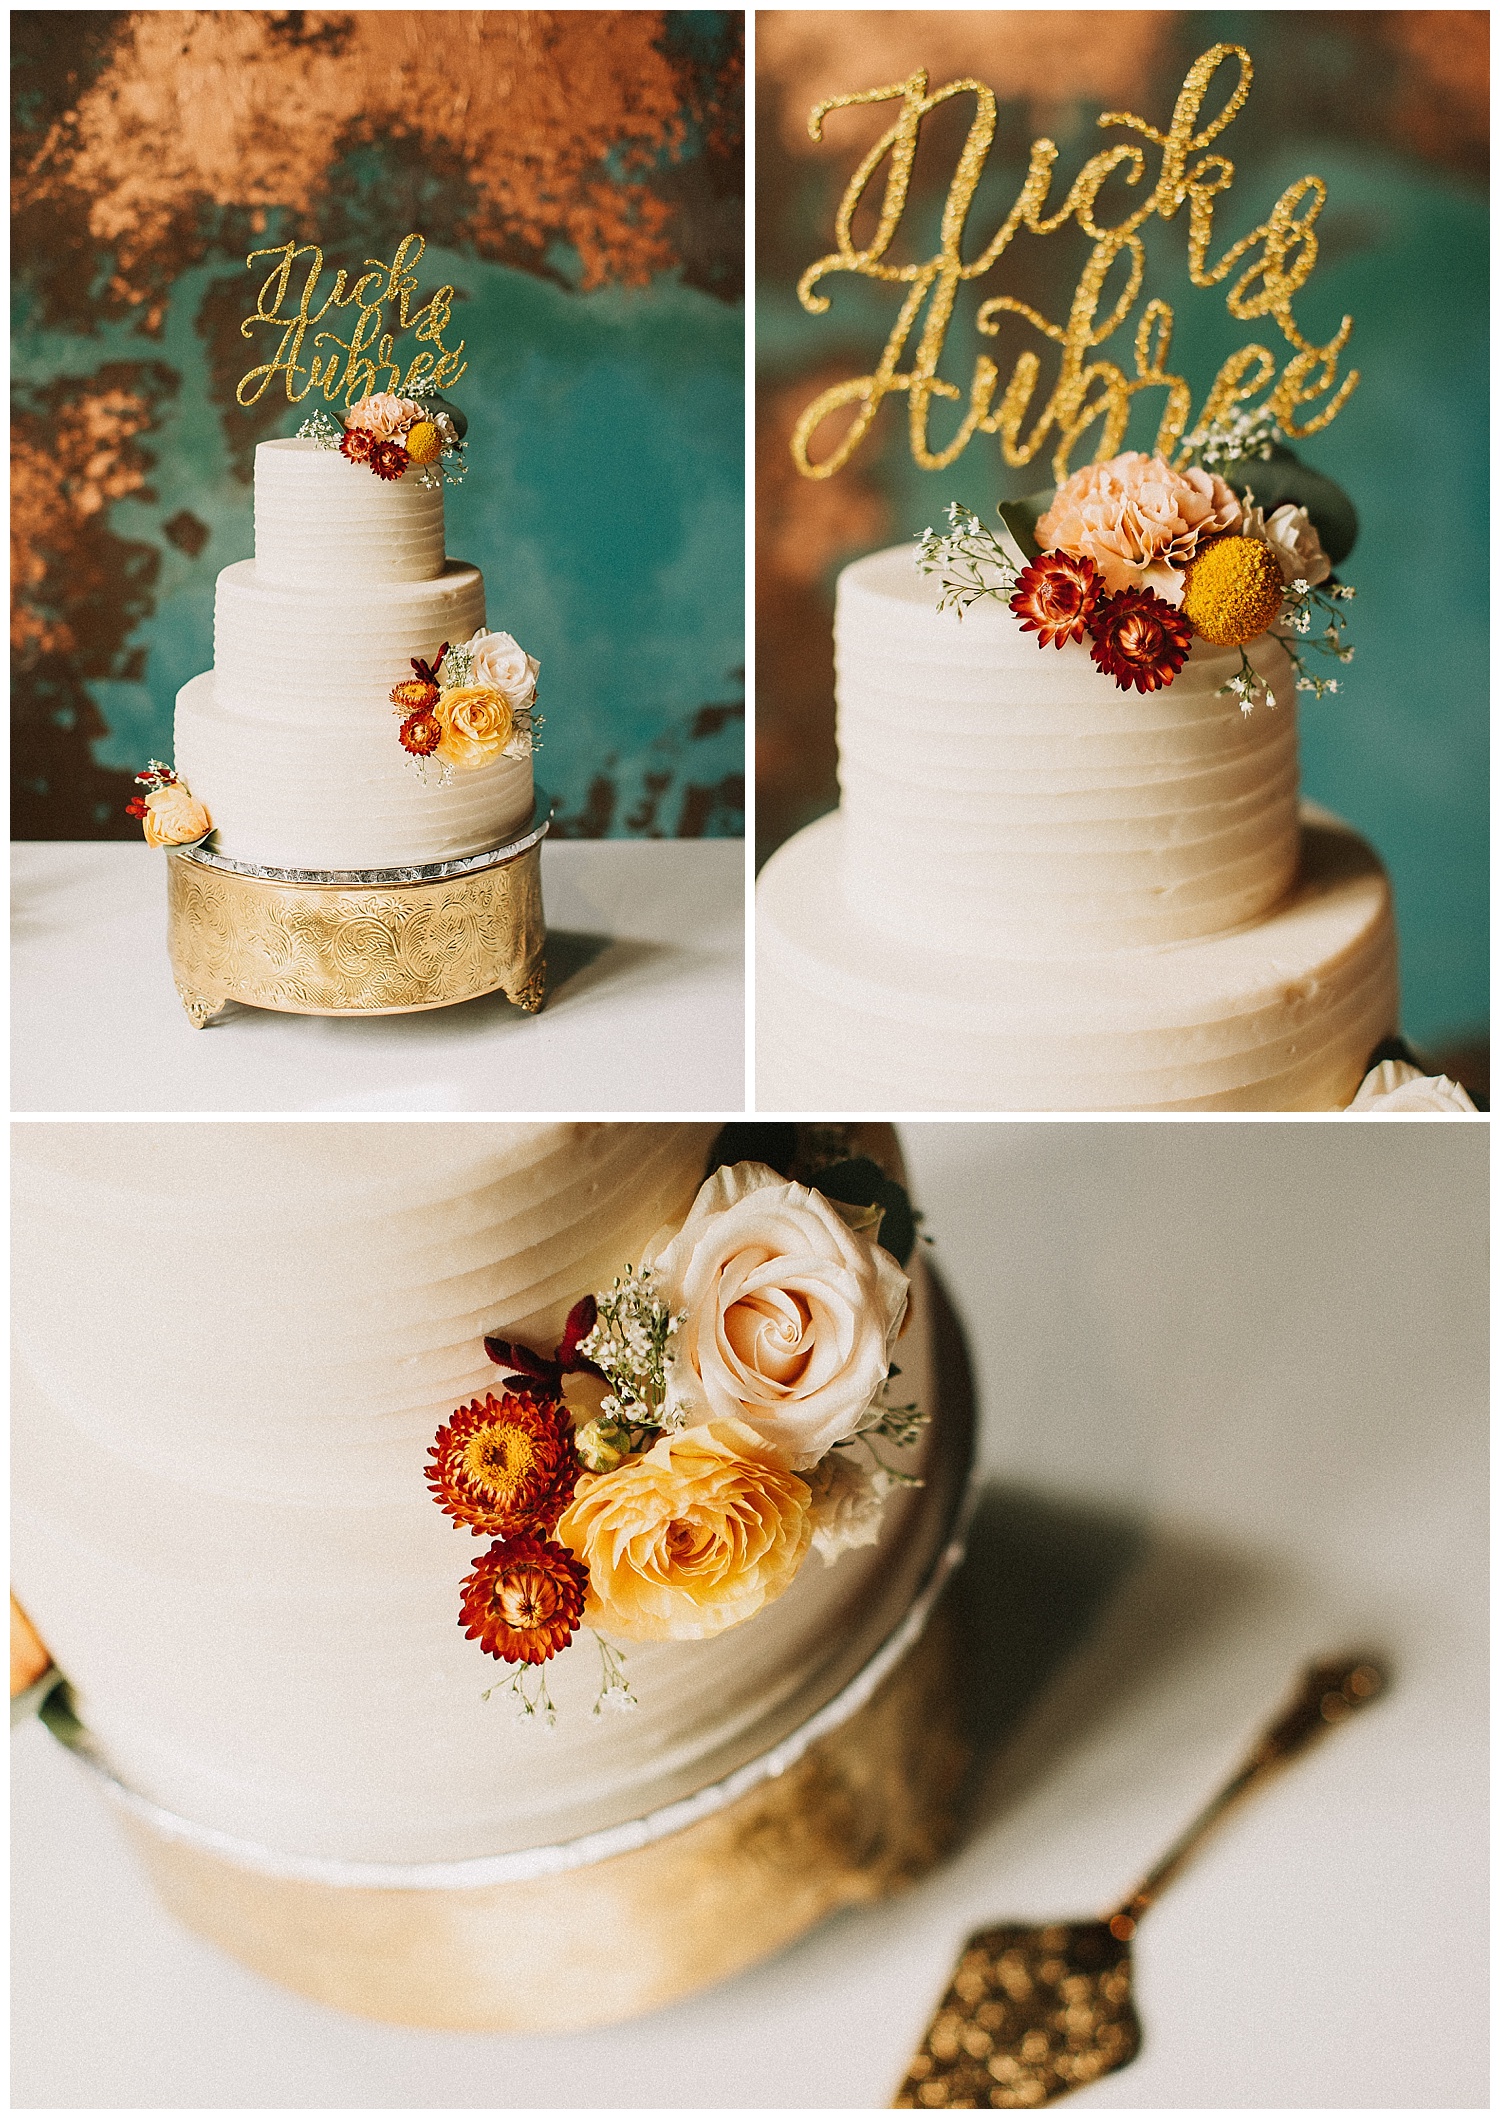 wedding cake at tinker house events